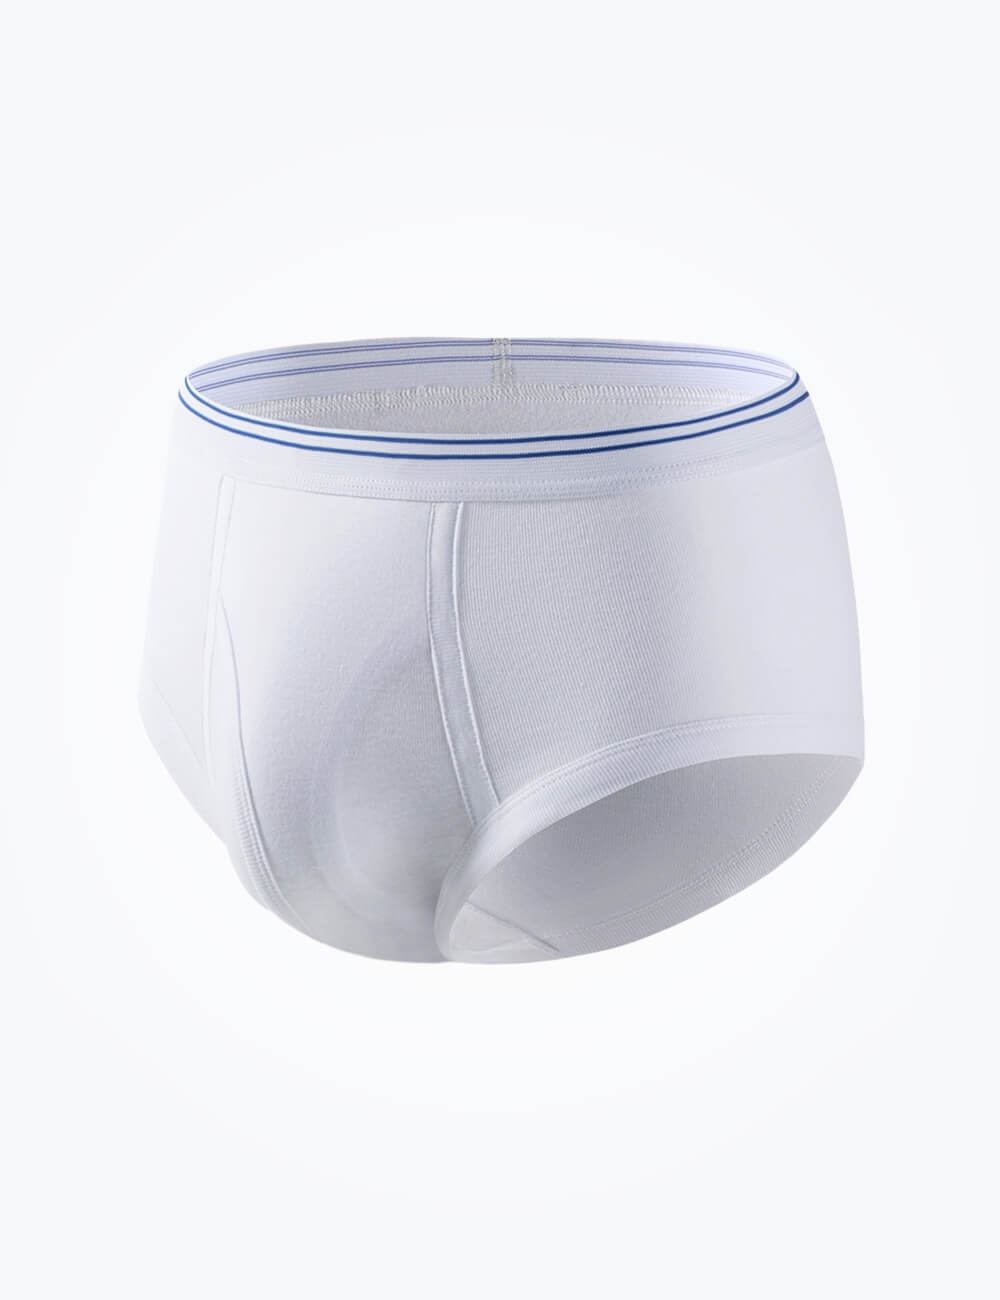 FREE Assurance Incontinence Underwear or Briefs Samples From ViewPoints  (Survey Required)